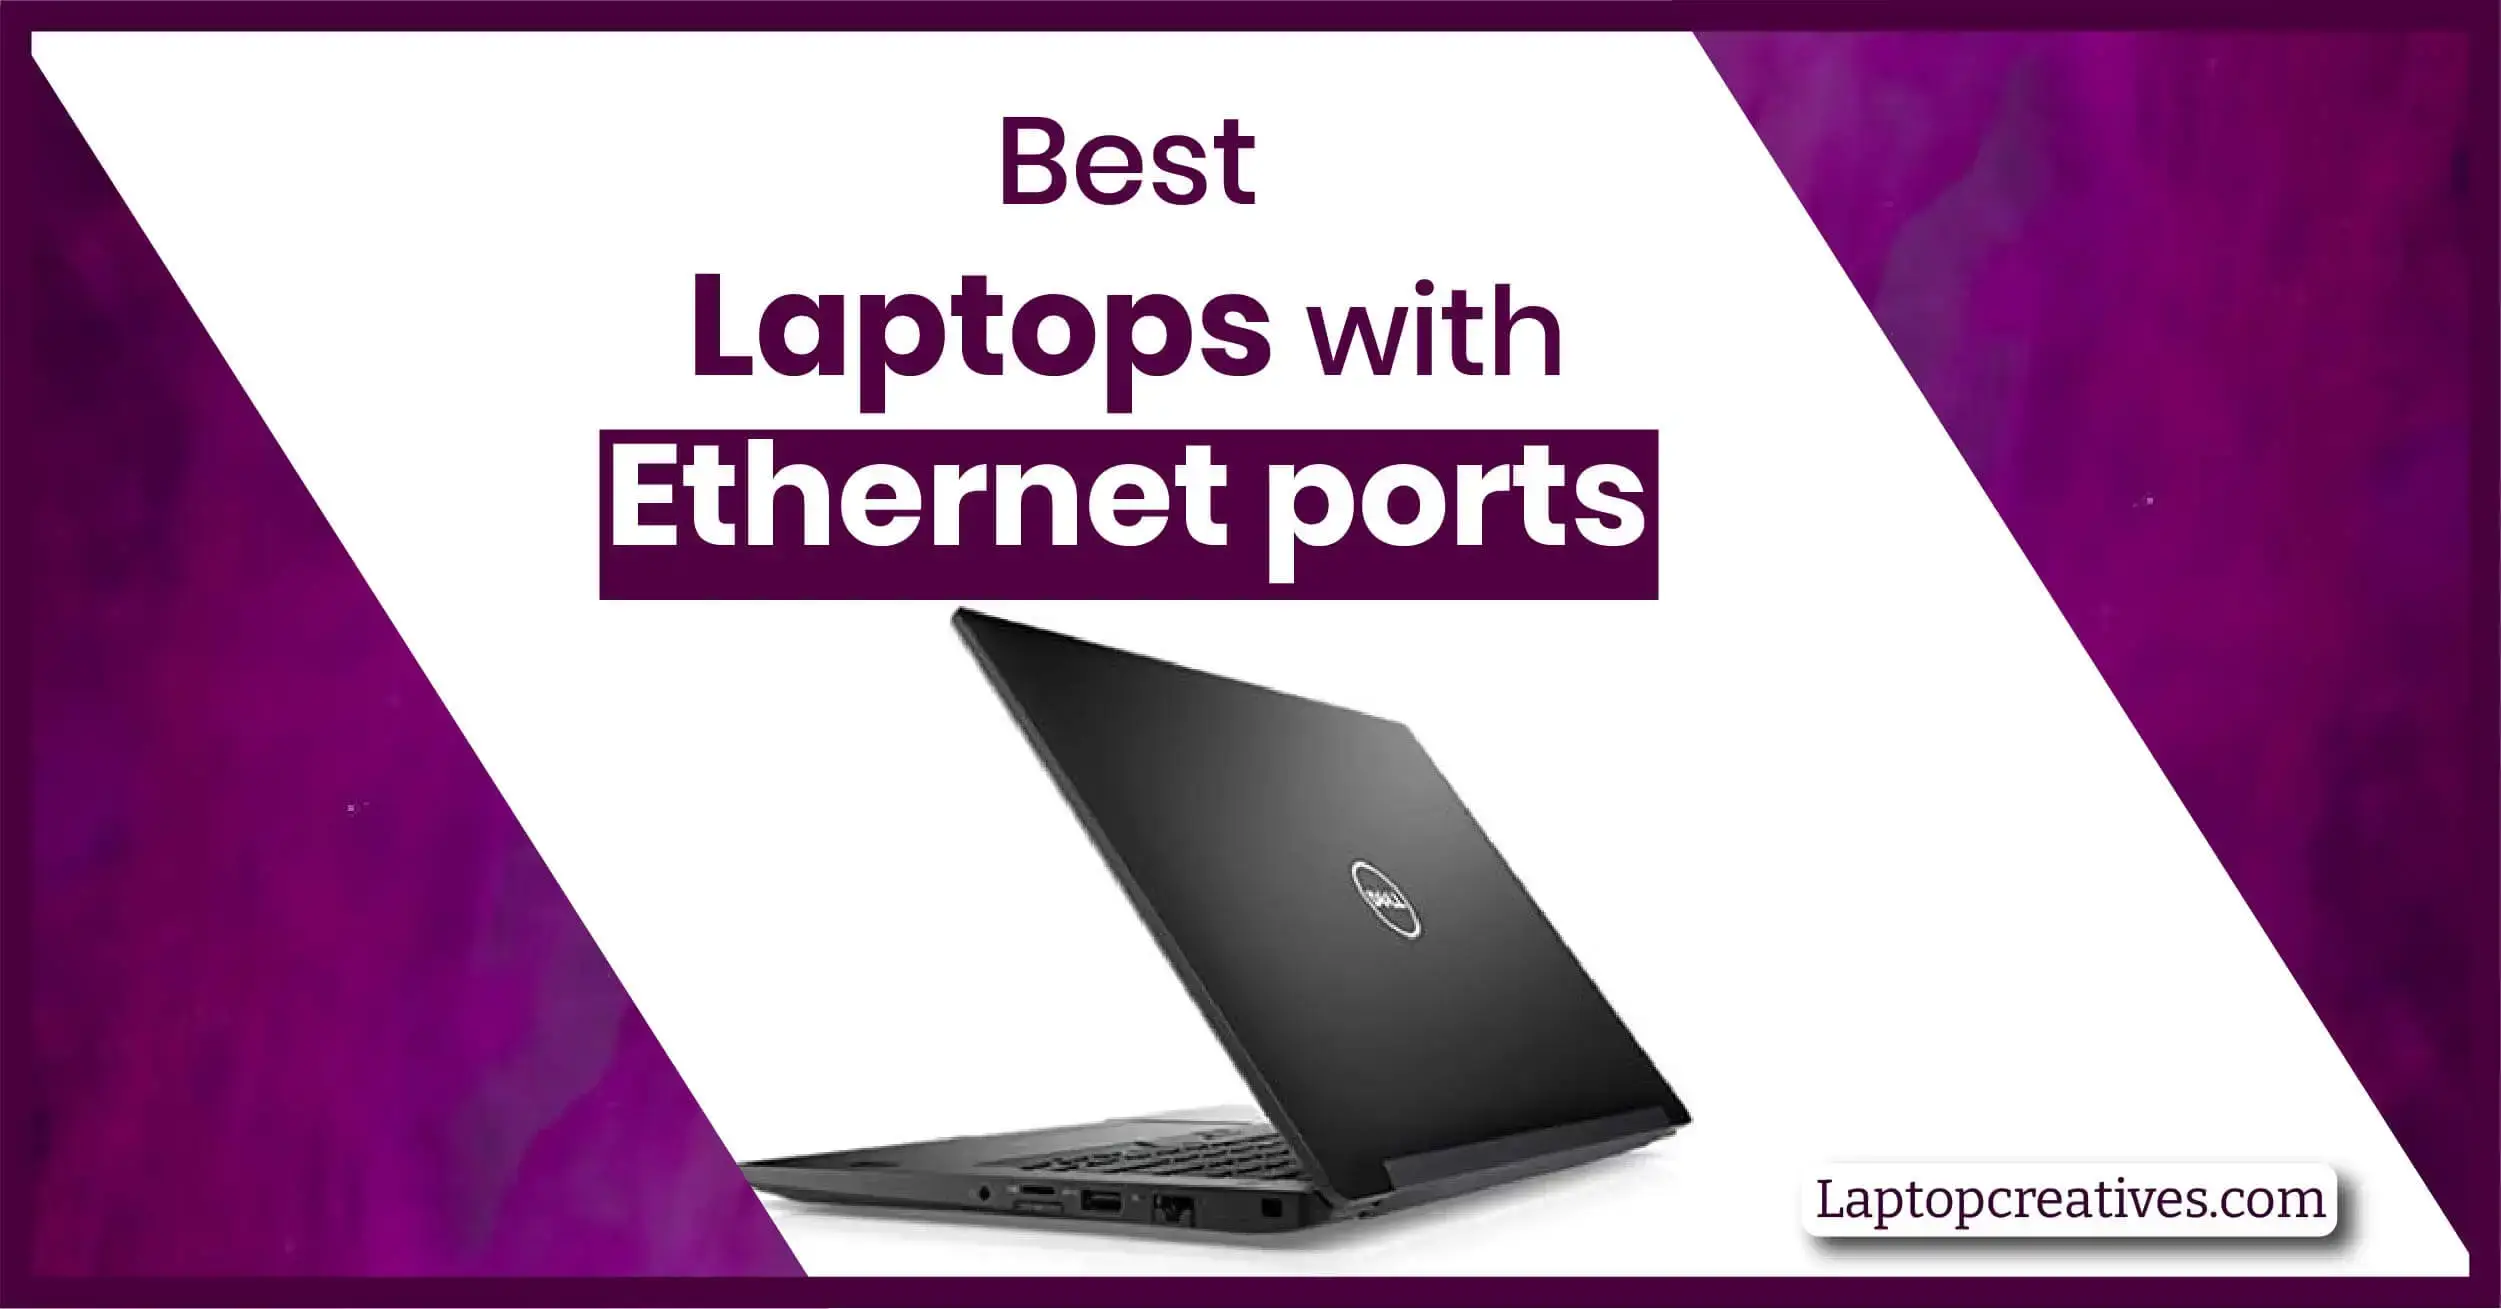 Best laptops with Ethernet ports